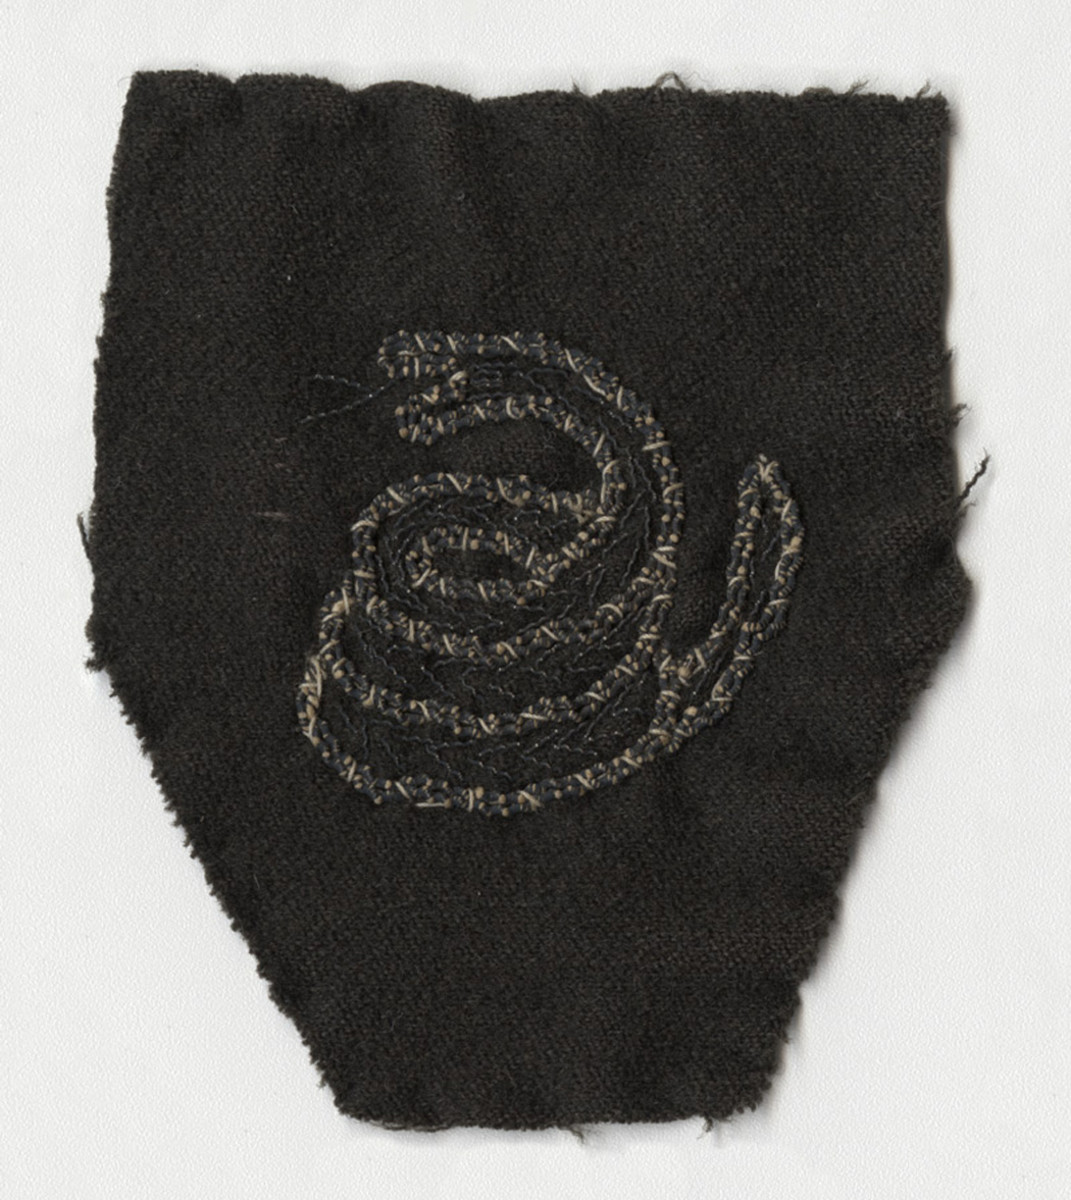 369th Regiment shoulder sleeve insignia (Fighting Rattlesnakes)  “Black Rattlers” was the nickname given to the 369th Regiment, chosen because of their courage and spirit. In addition to “Black Rattlers,” the 369th Regiment was also referred to as “Men of Bronze” and “Harlem Hellfighters.”